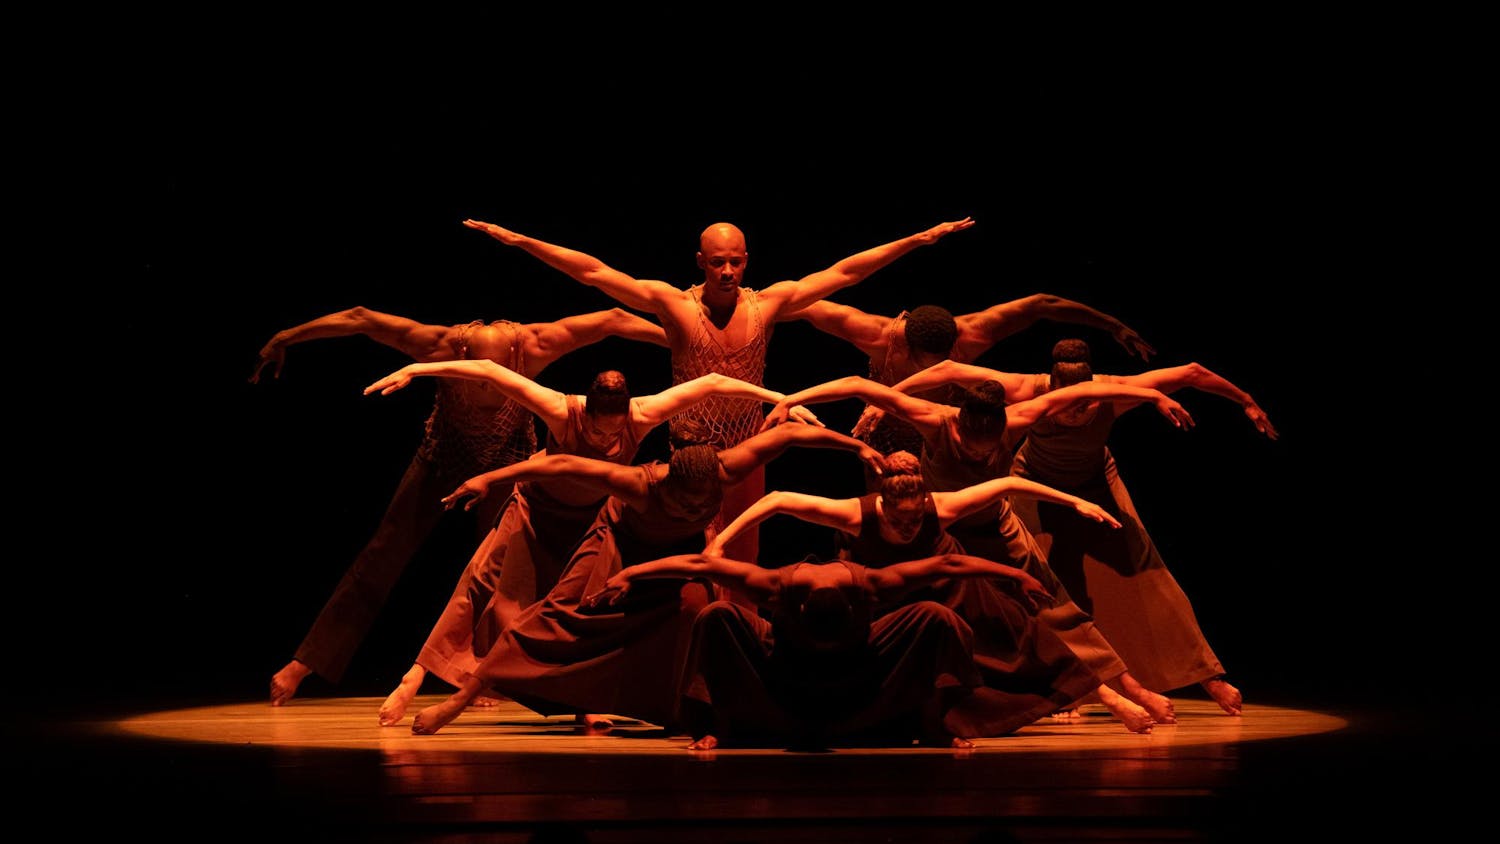 Alvin Ailey American Dance Theater in Alvin Ailey's Revelations 2022 ONG performance. Photo by Christopher Duggan_168.jpg